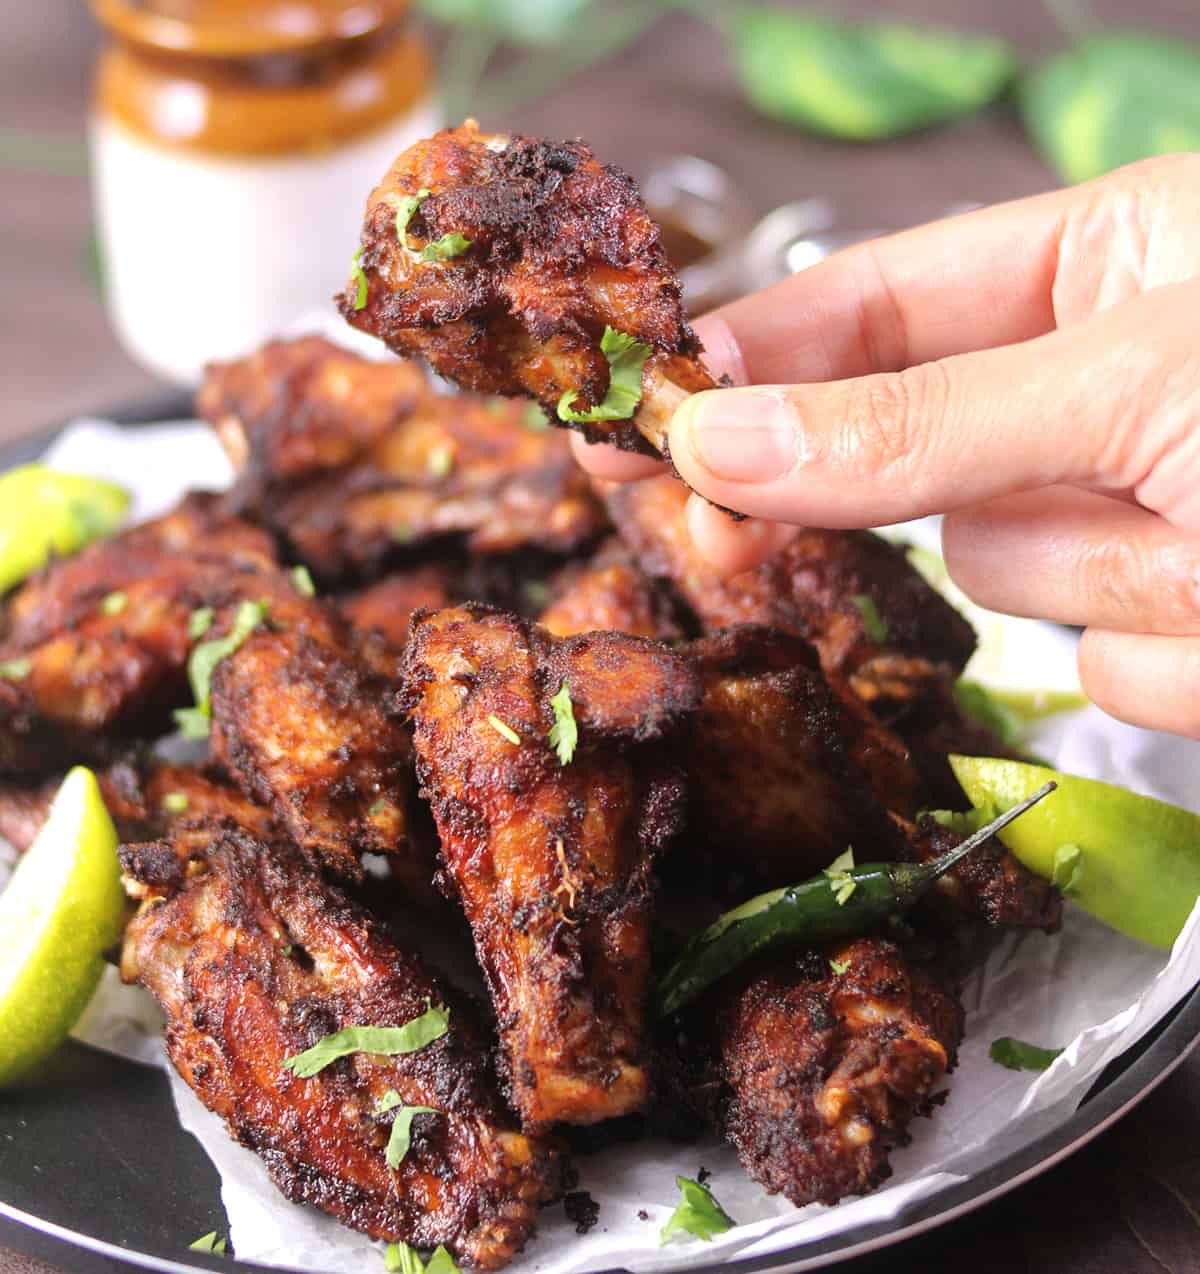 How long to fry chicken wings for perfect crispy crust?